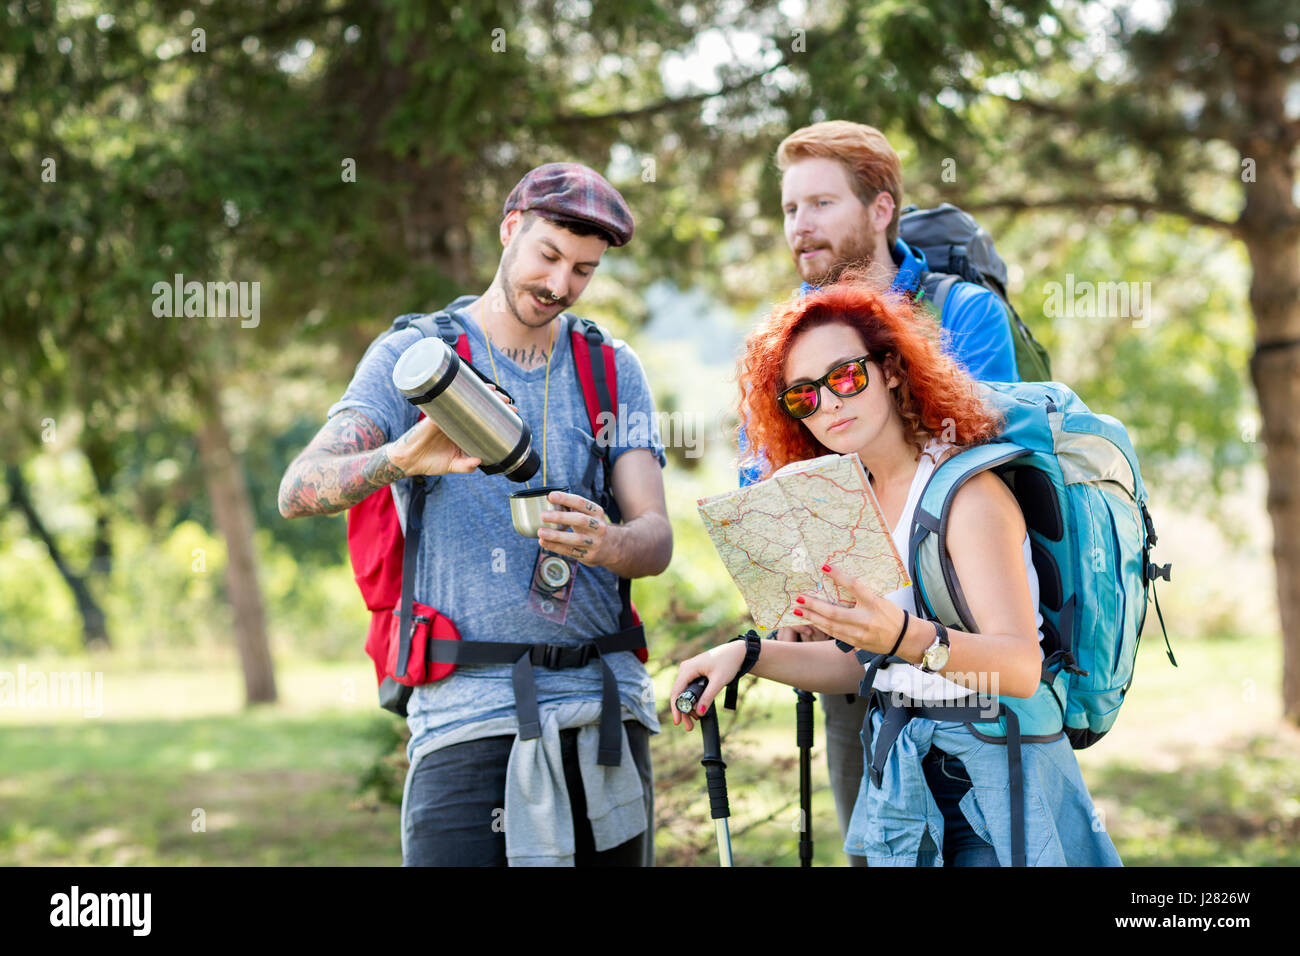 Sports people hiking with backpack, map, thermos and hiking sticks through forest Stock Photo